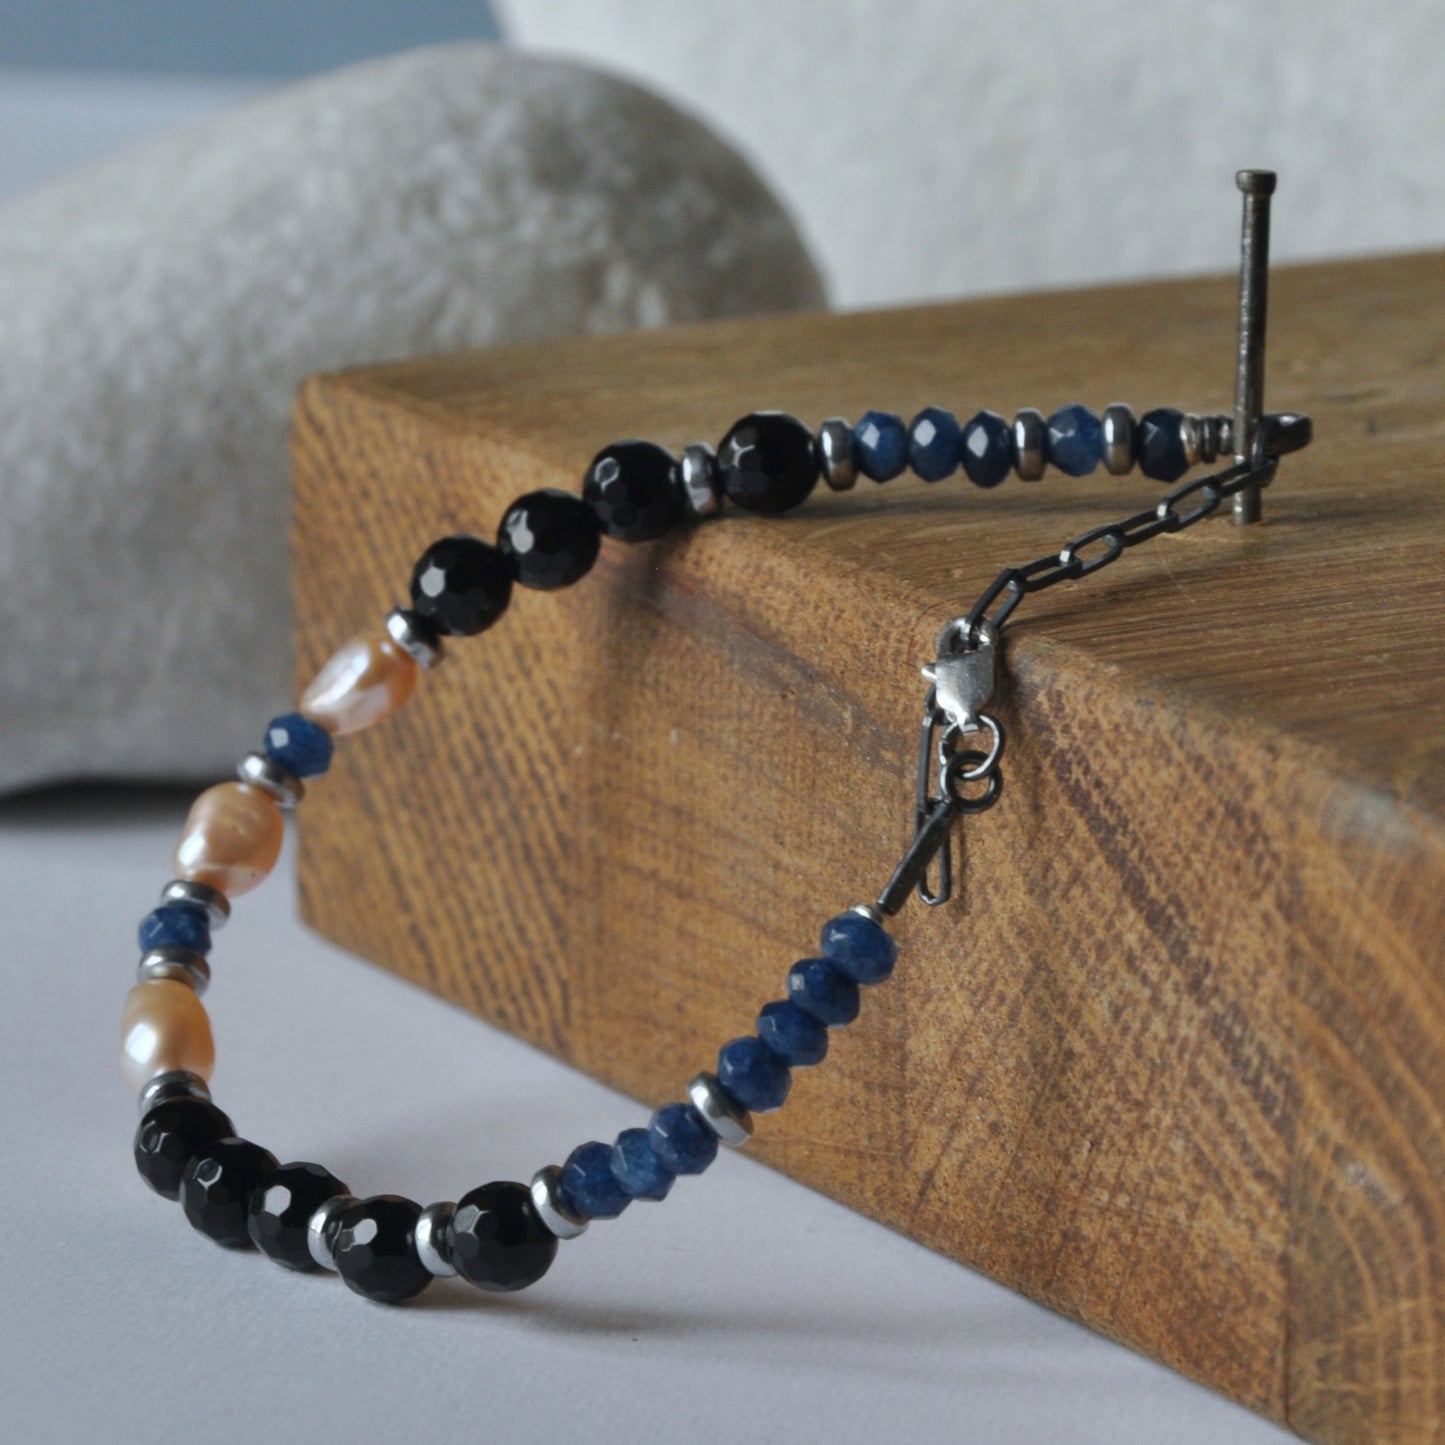 Bracelet with natural pearls in salmon color, onyx and dark blue agate rondelles 'Pearls with Onyx'